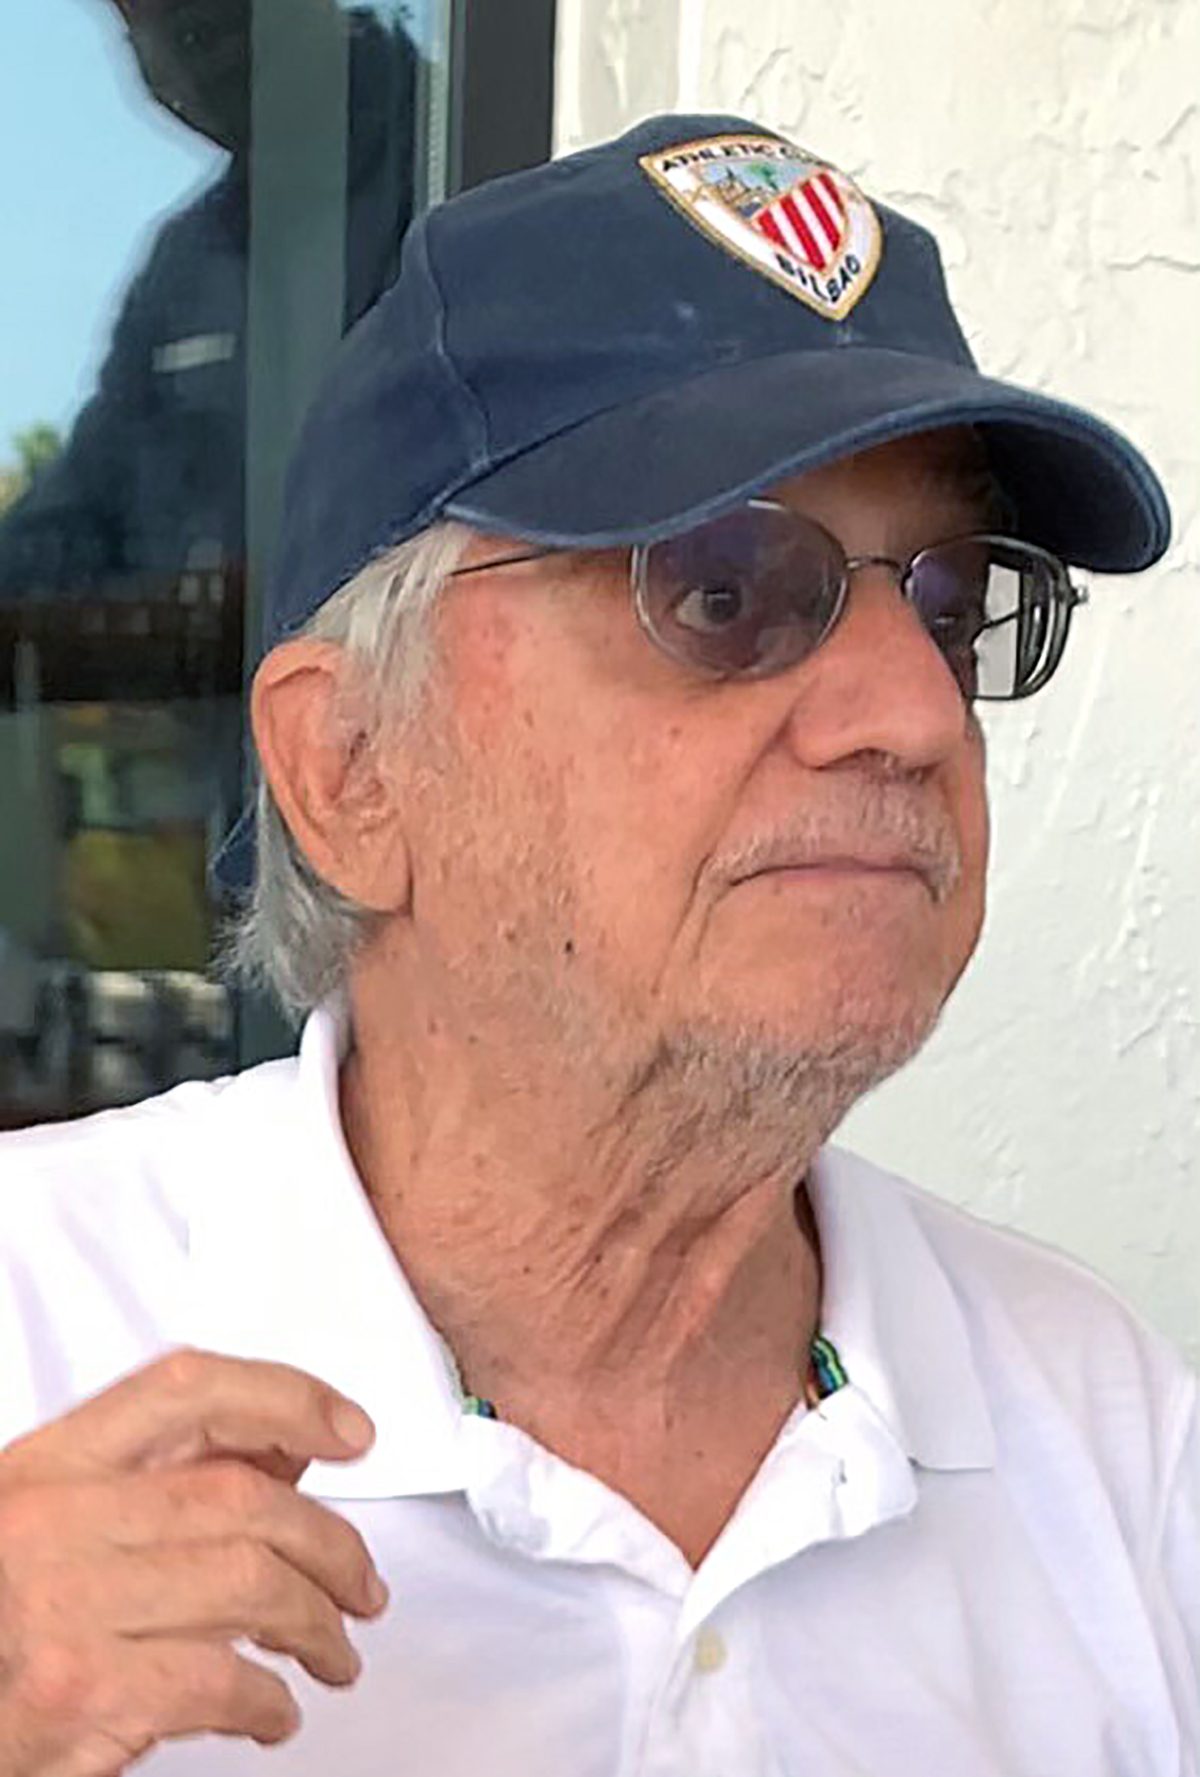 PHOTO: Simon Segal, 80, was a professor at FIU and a structural engineer, who died in the condo collapse in Surfside, Fla.